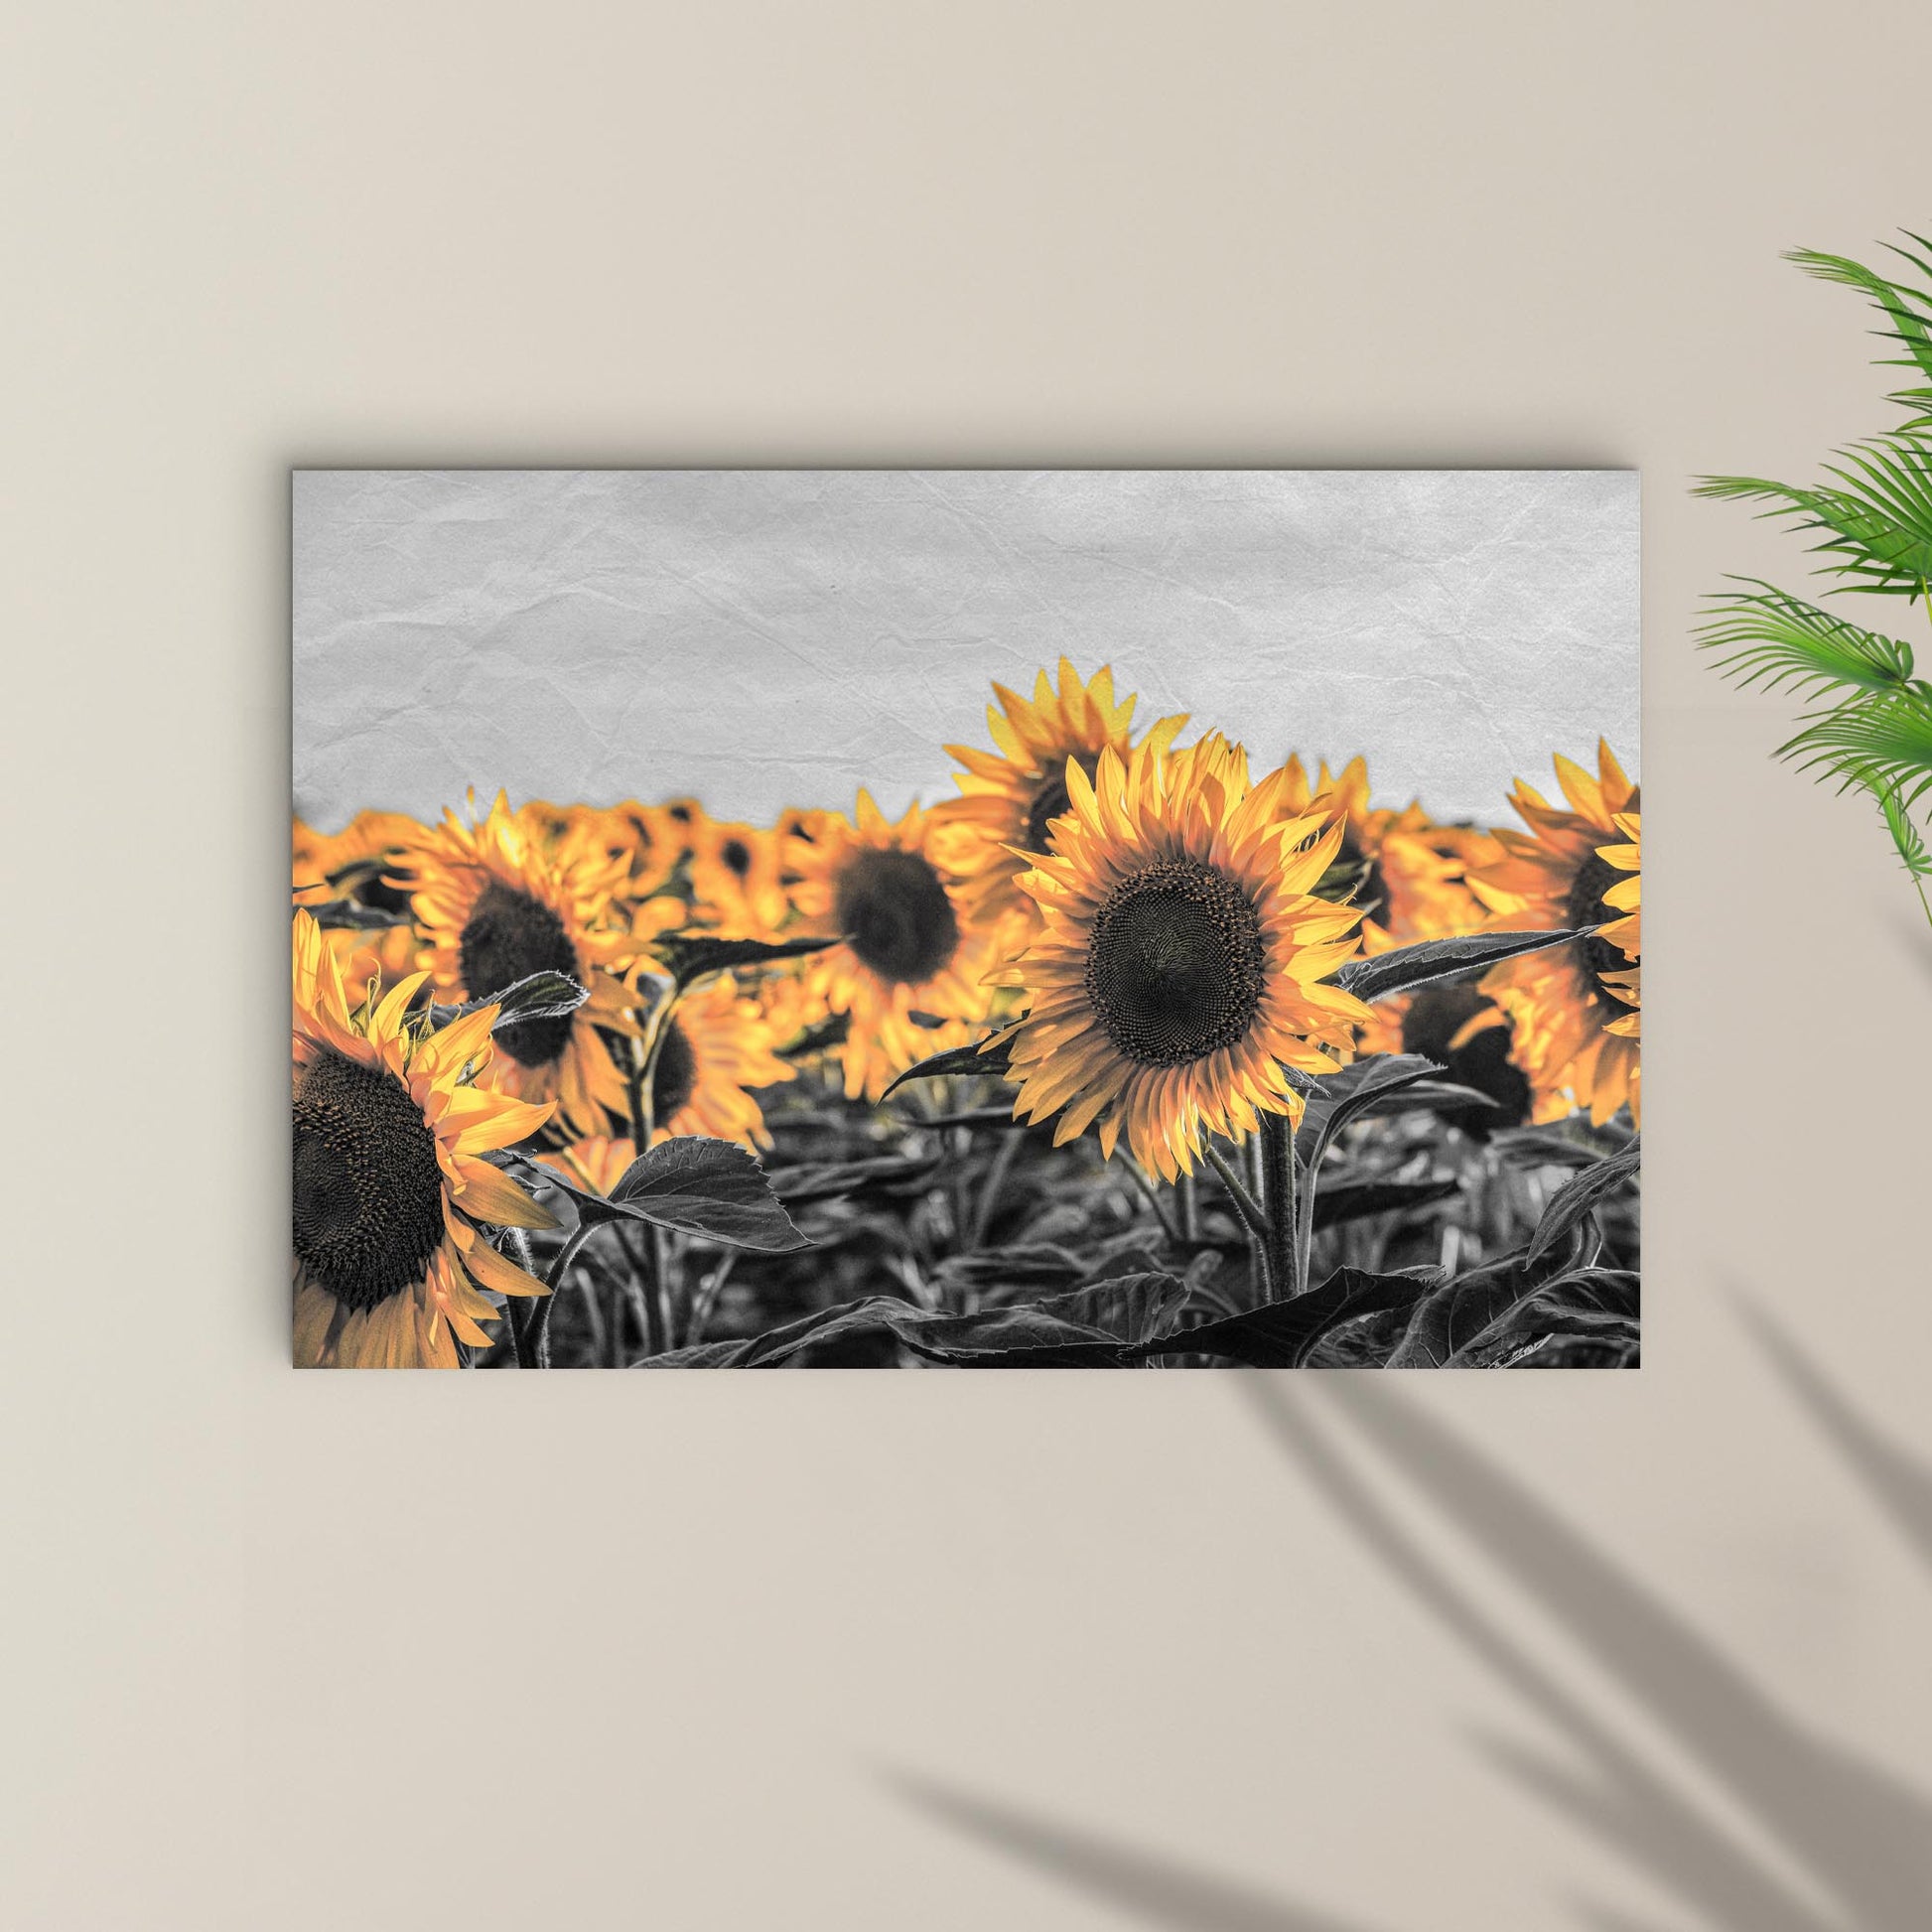 Rustic Pop Sunflower Canvas Wall Art - Image by Tailored Canvases